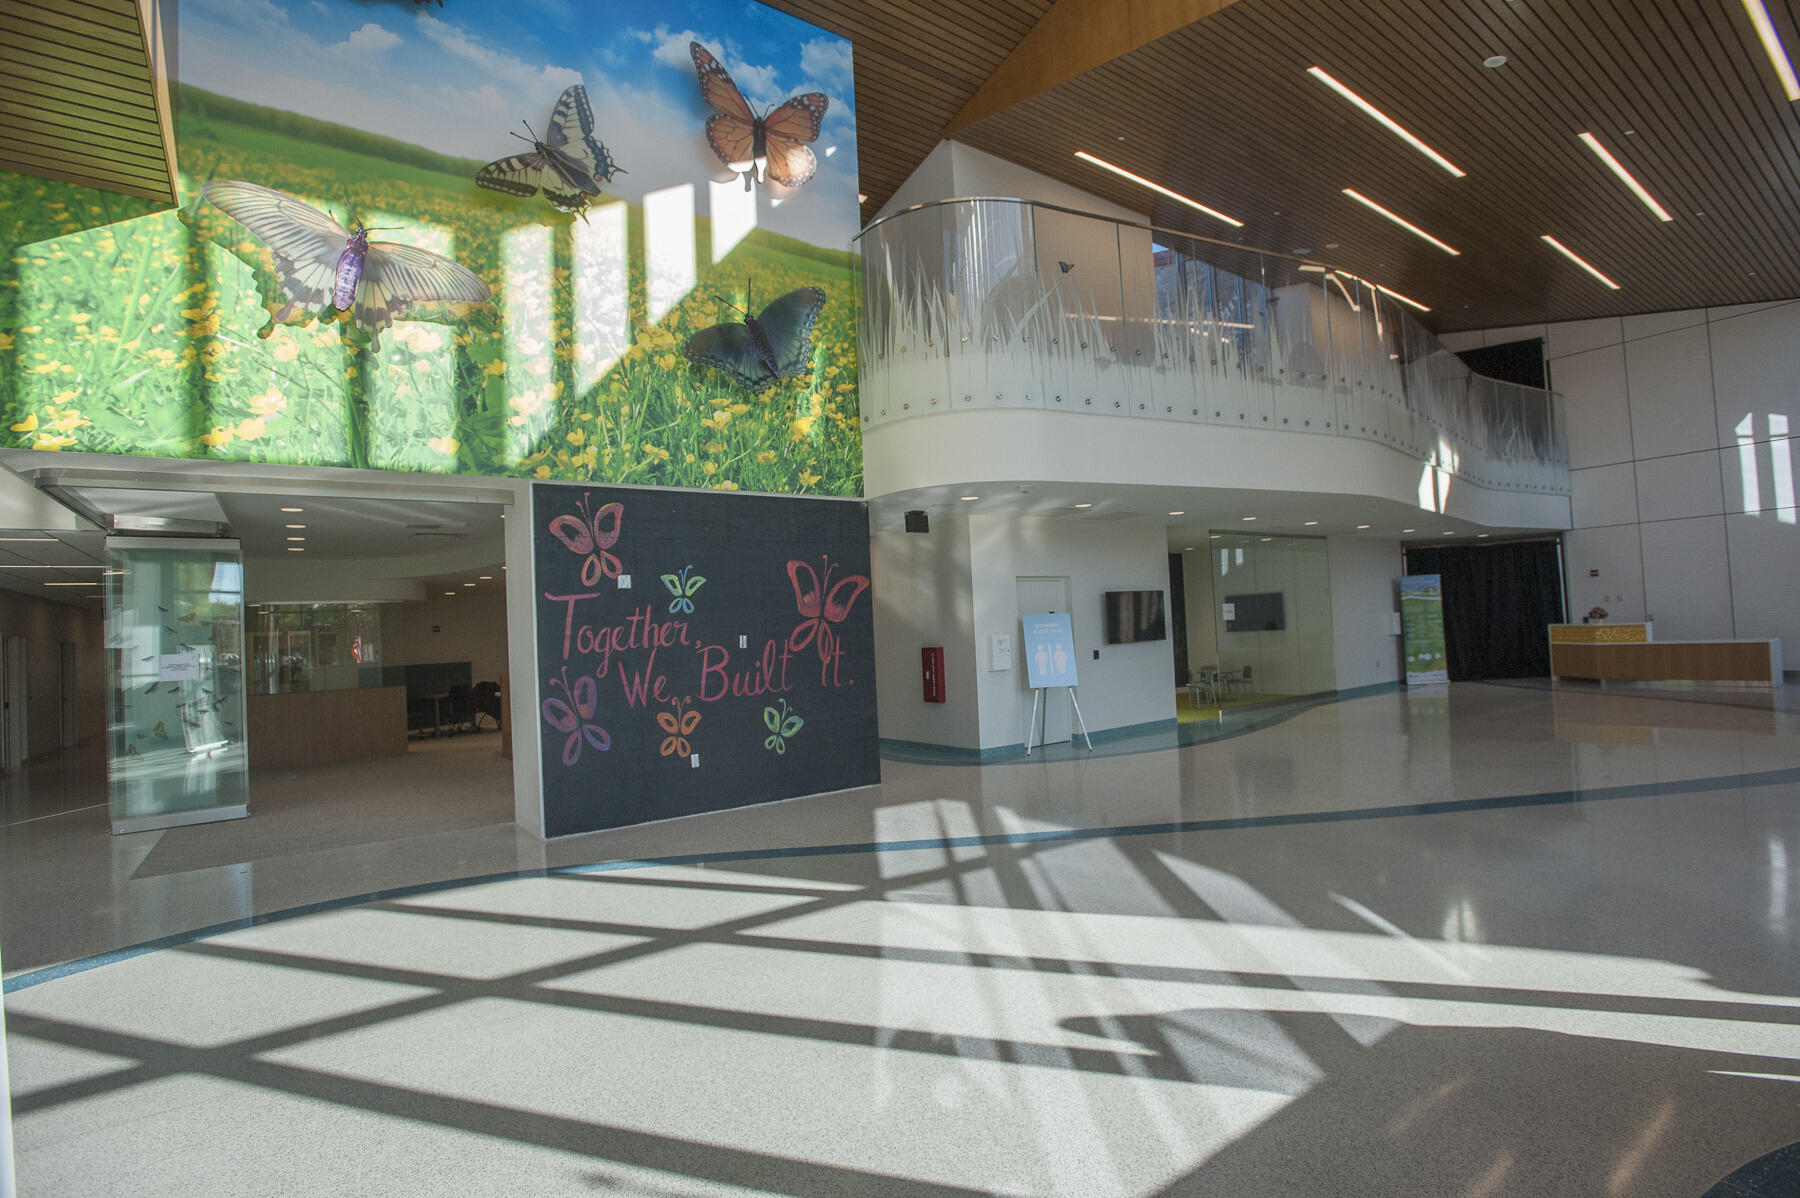 The facility is transformational for children’s mental health care, bringing VTCC’s services out of a 50-year-old institutional space and into a modern facility with an inspirational design that incorporates natural light, green space and unique safety features important to modern mental health care.